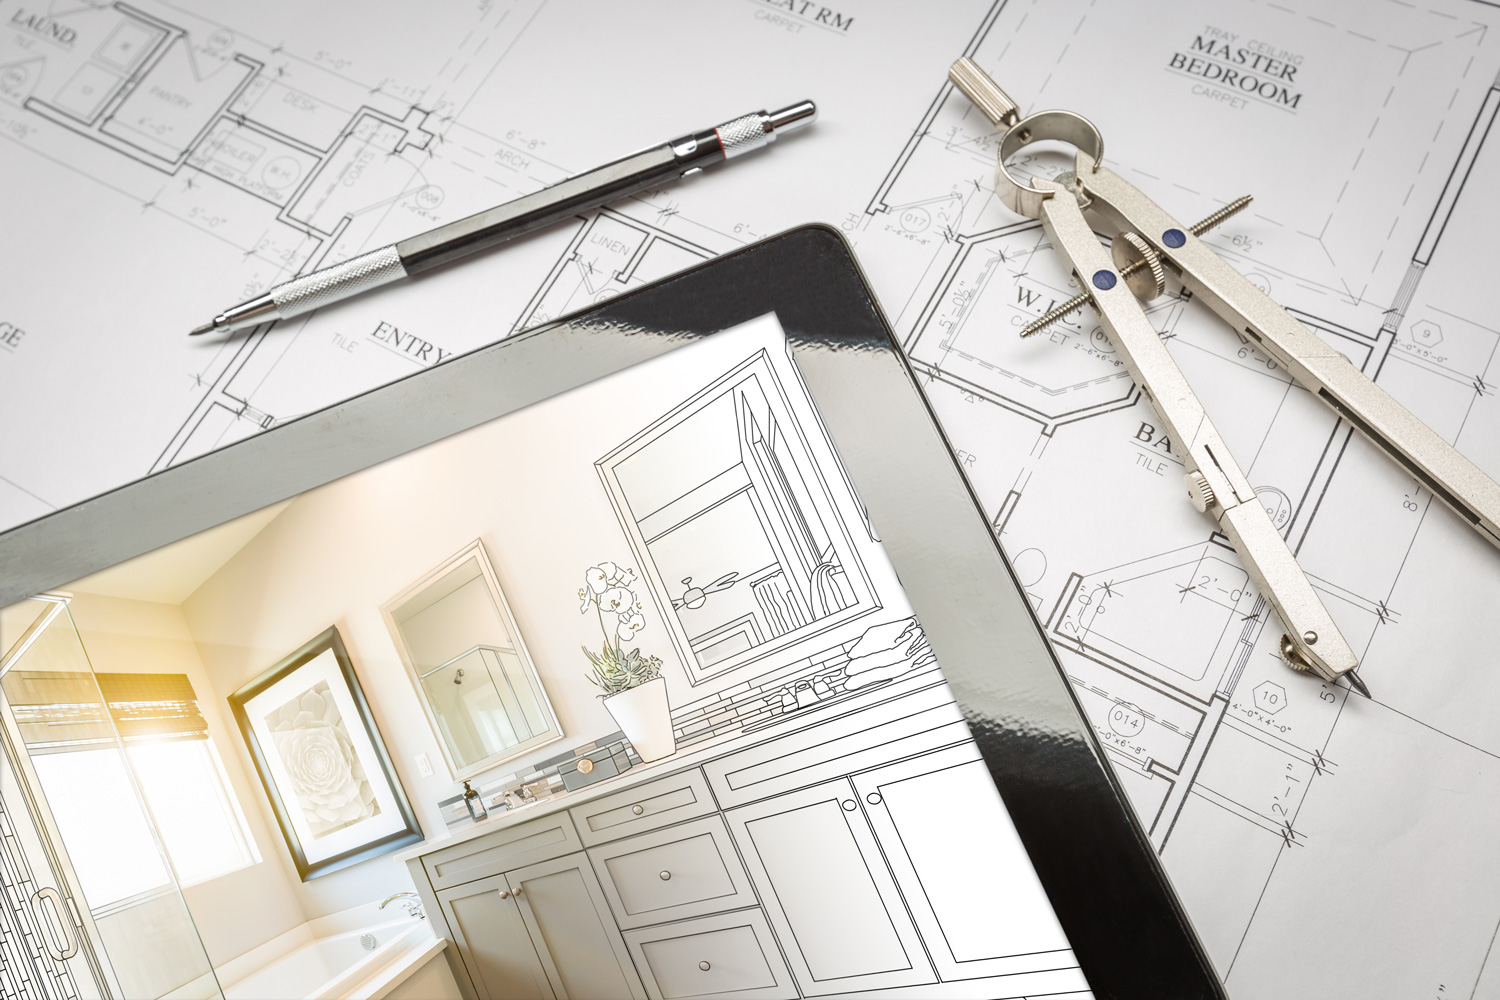 Computer Tablet with Master Bathroom Design Over House Plans, Pencil and Compass.